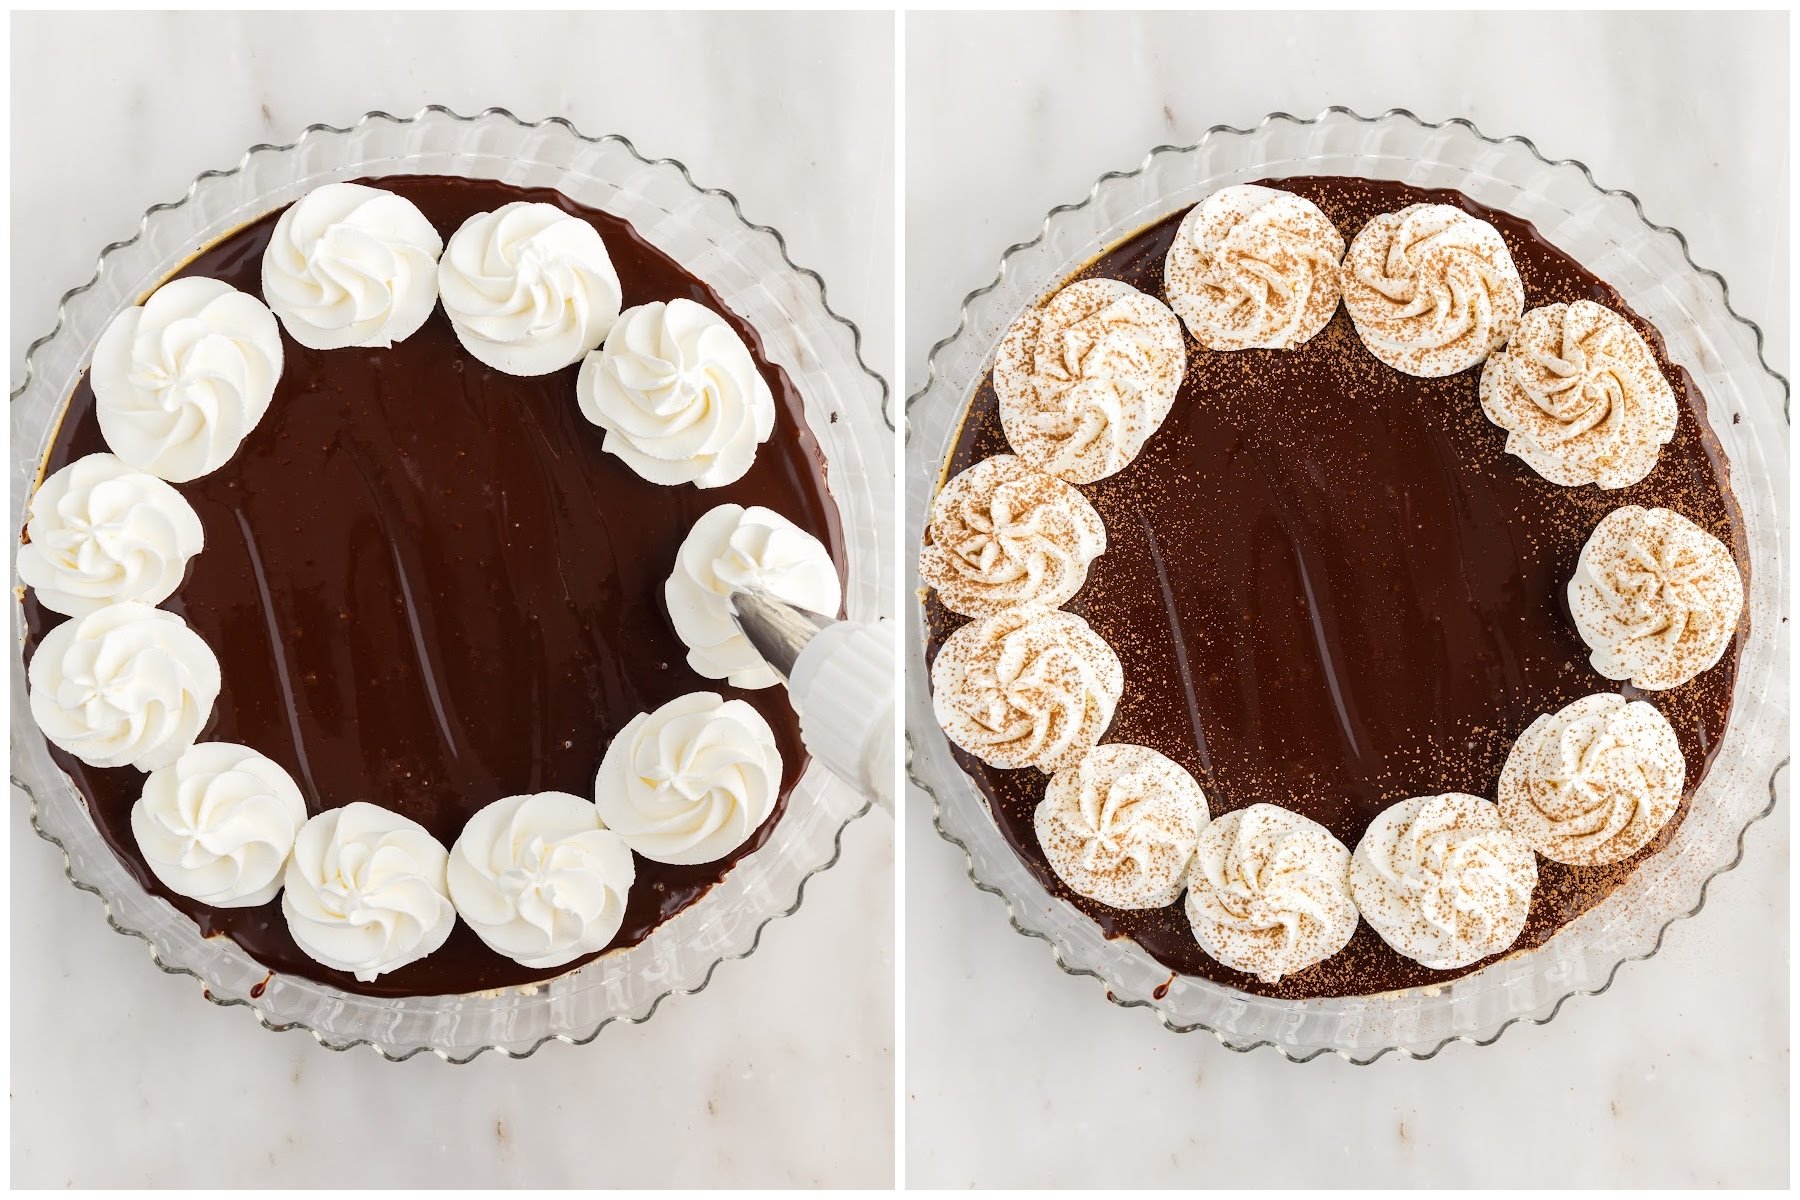 Dollops of whipped cream added to Bailey’s Cheesecake and an image of the Bailey’s Cheesecake after being dusted with cocoa powder.